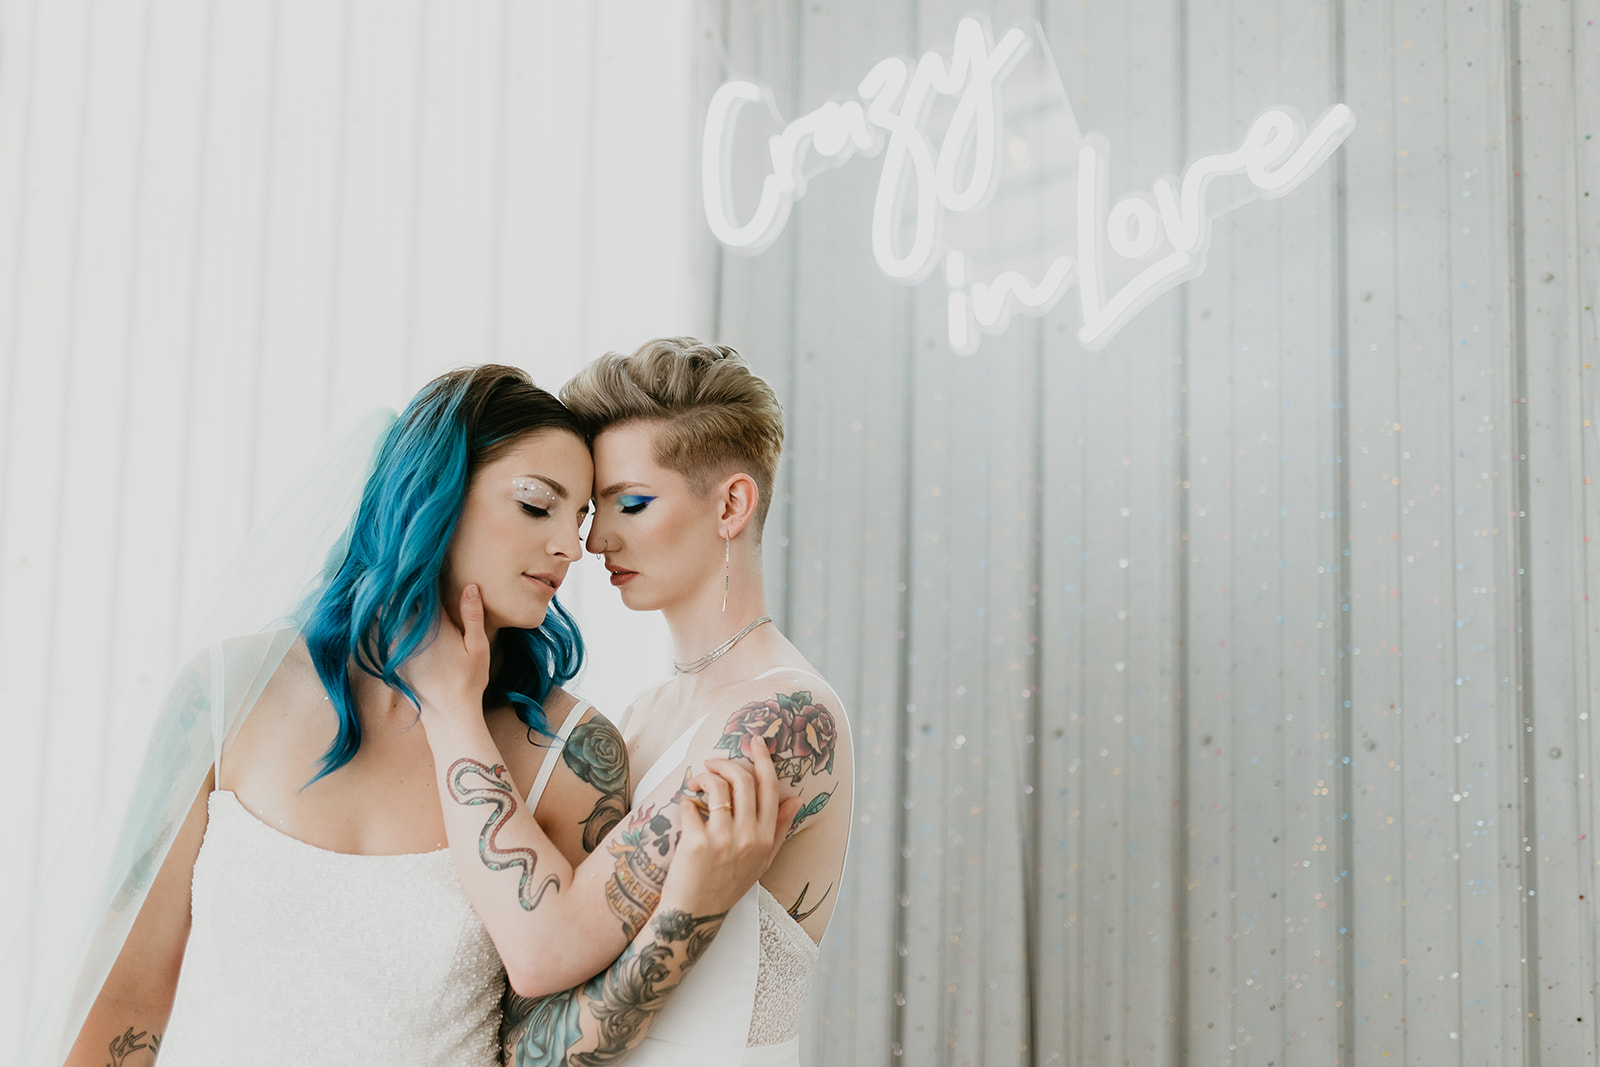 Rocker styled brides pose in front of a Crazy in Love neon sign